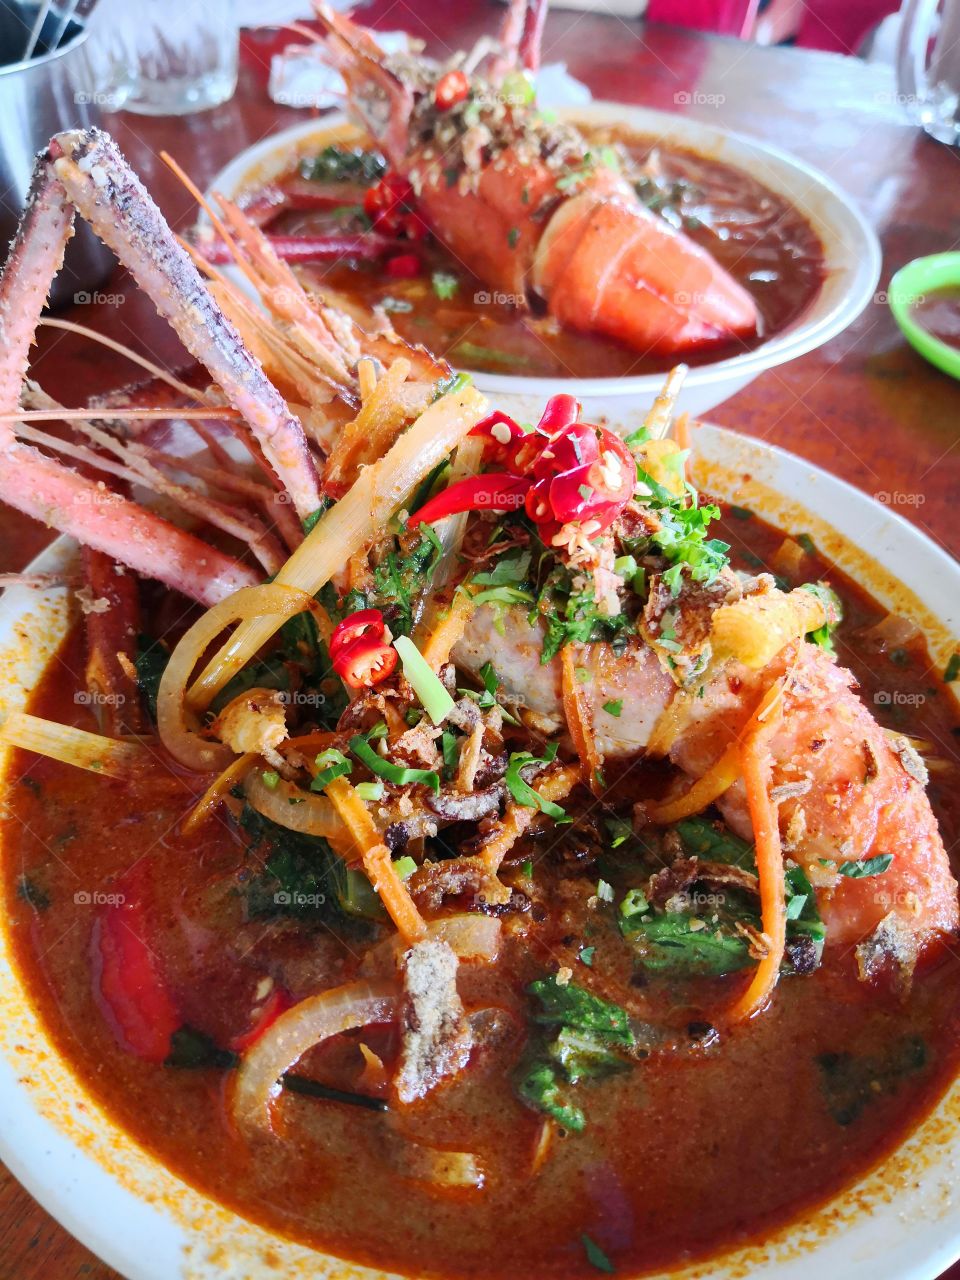 Full of flavor... Tom Yam Prawn Noodle Soup...